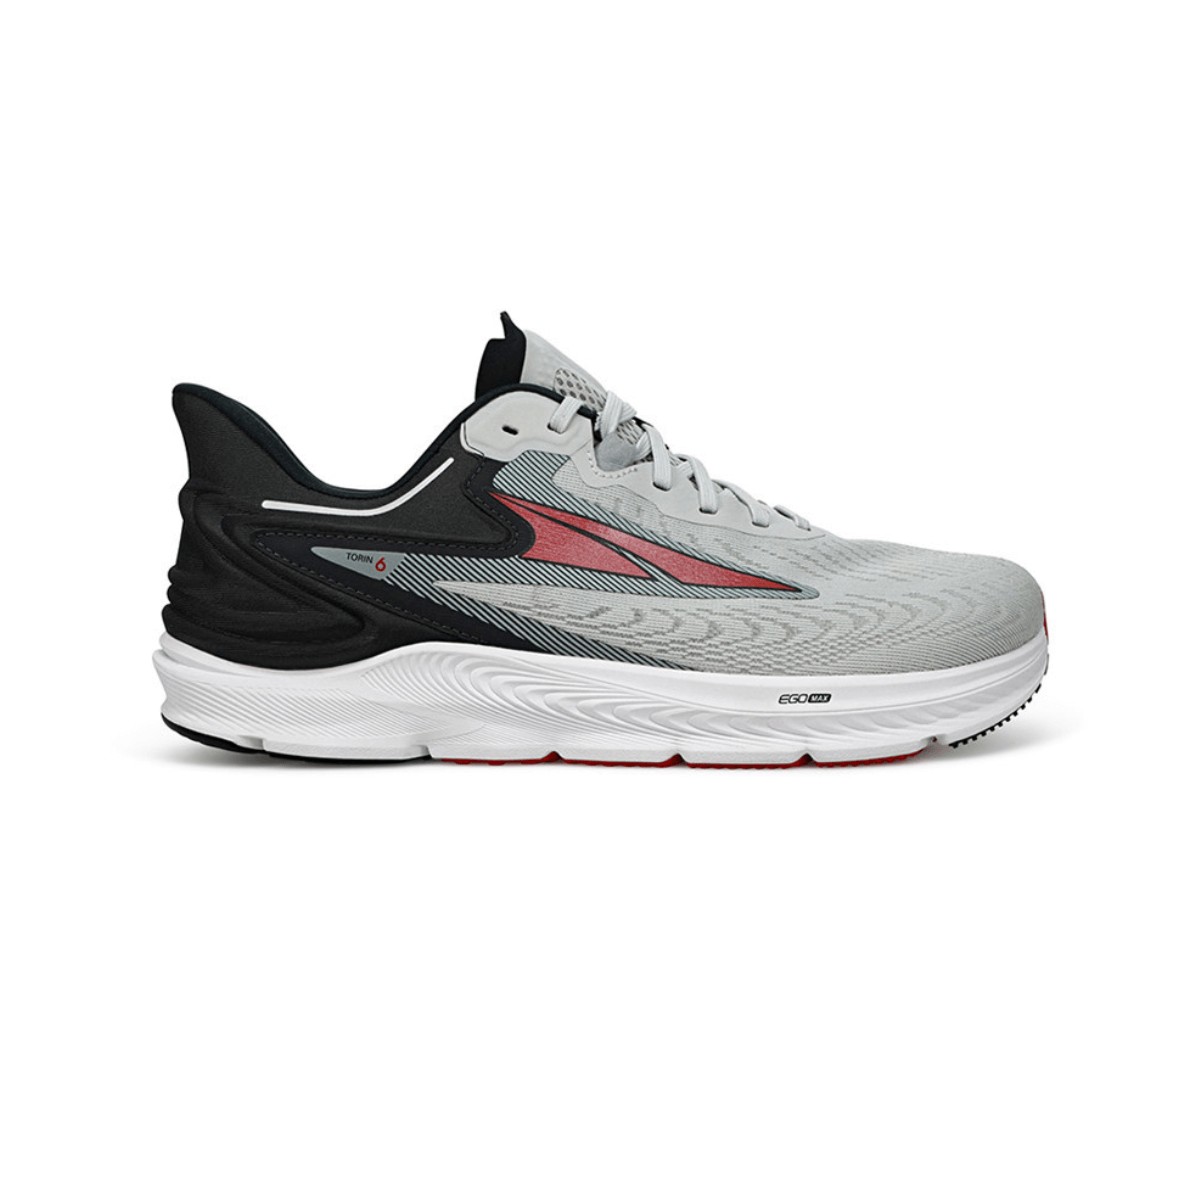 Altra Torin 6 Shoes Gray Red AW22, Size 41 - EUR